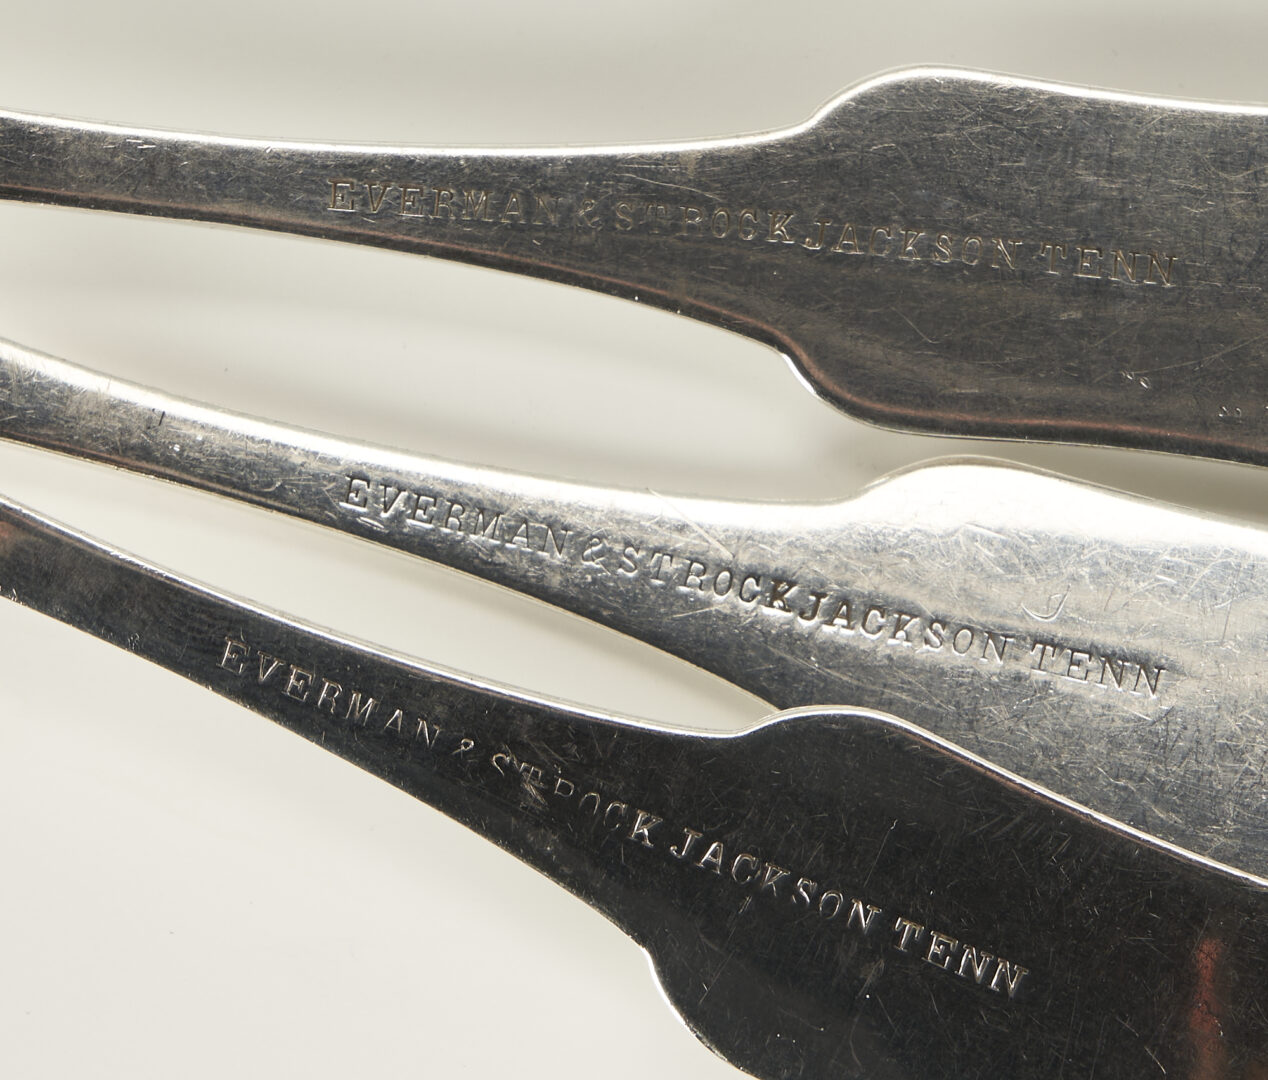 Lot 74: 6 Jackson, TN Coin Silver Spoons, by Everman & Strock